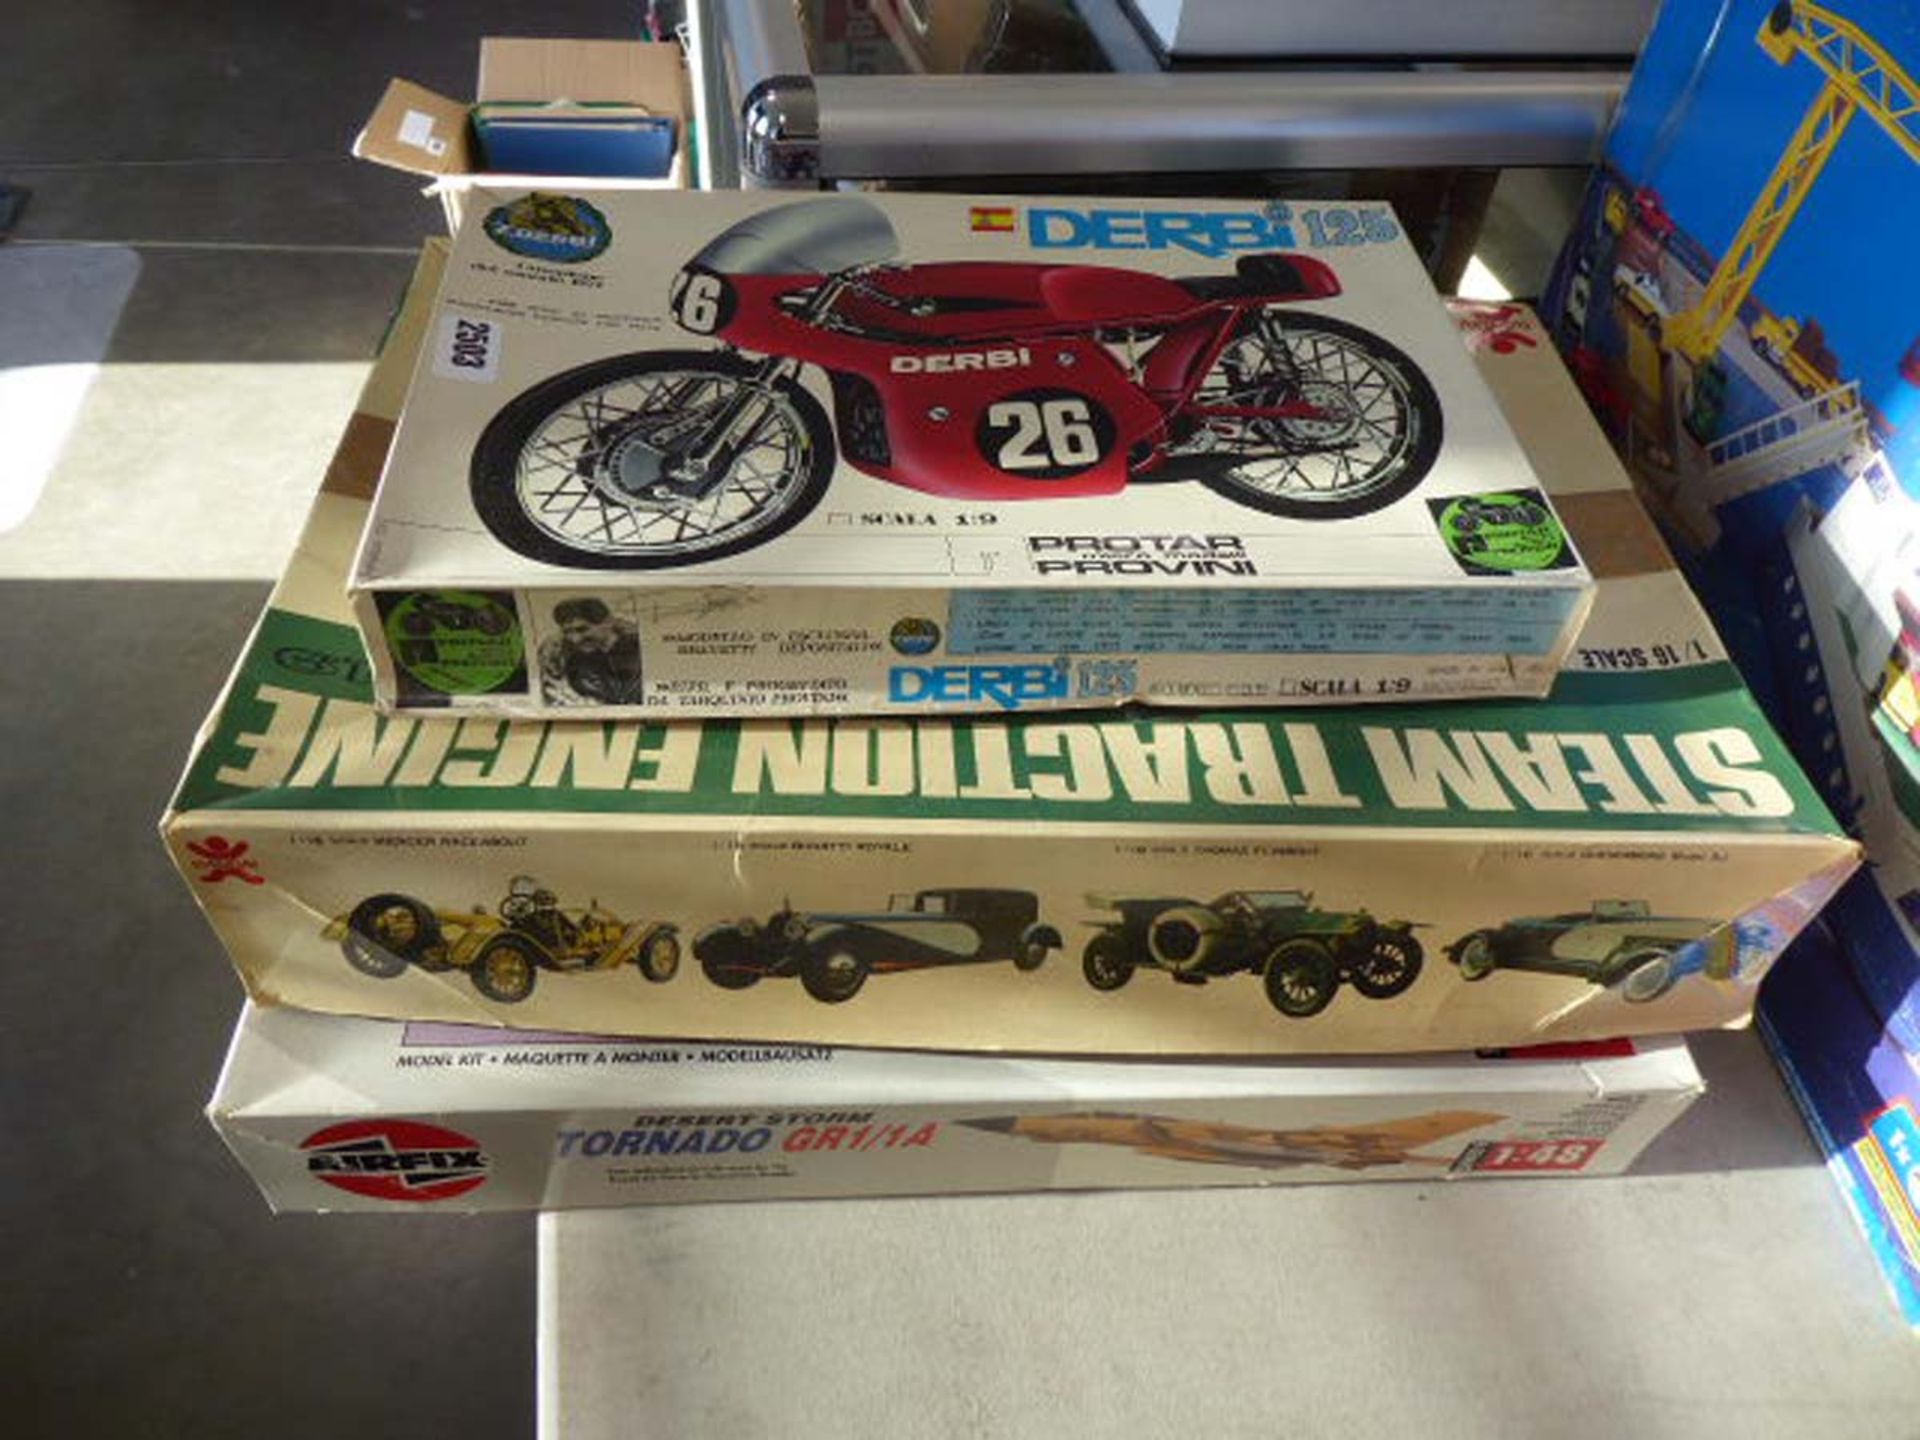 Derby model of a motorbike, steam engine and a jet aircraft